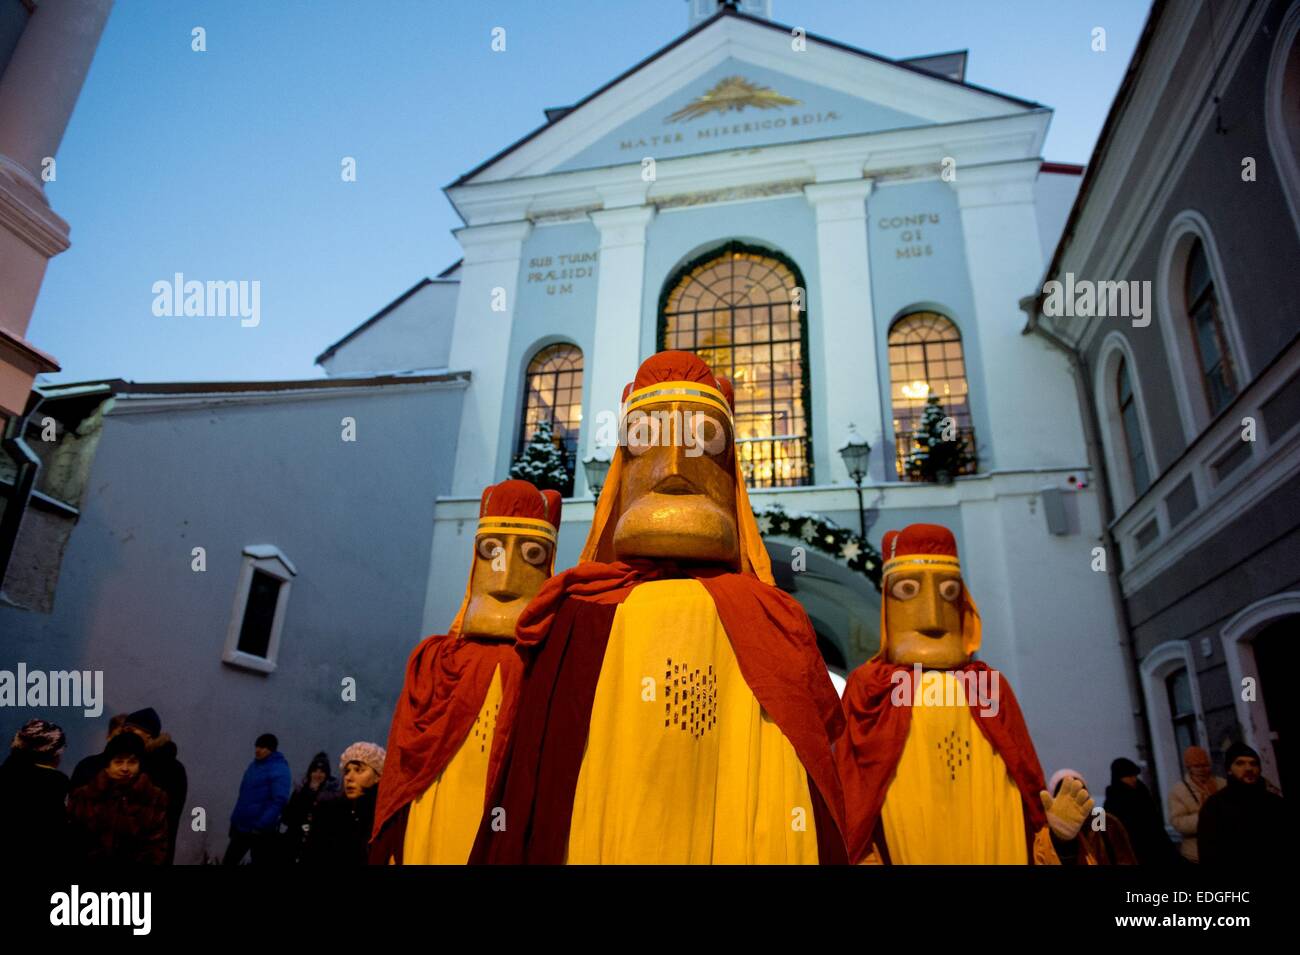 Vilnius, Lithuania. 6th Jan, 2015. People parade through the streets during the celebration of Epiphany, a Christian festival commemorating Jesus' baptism in Jordan River, in Vilnius, Lithuania, Jan. 6, 2015. Credit:  Alfredas Pliadis/Xinhua/Alamy Live News Stock Photo